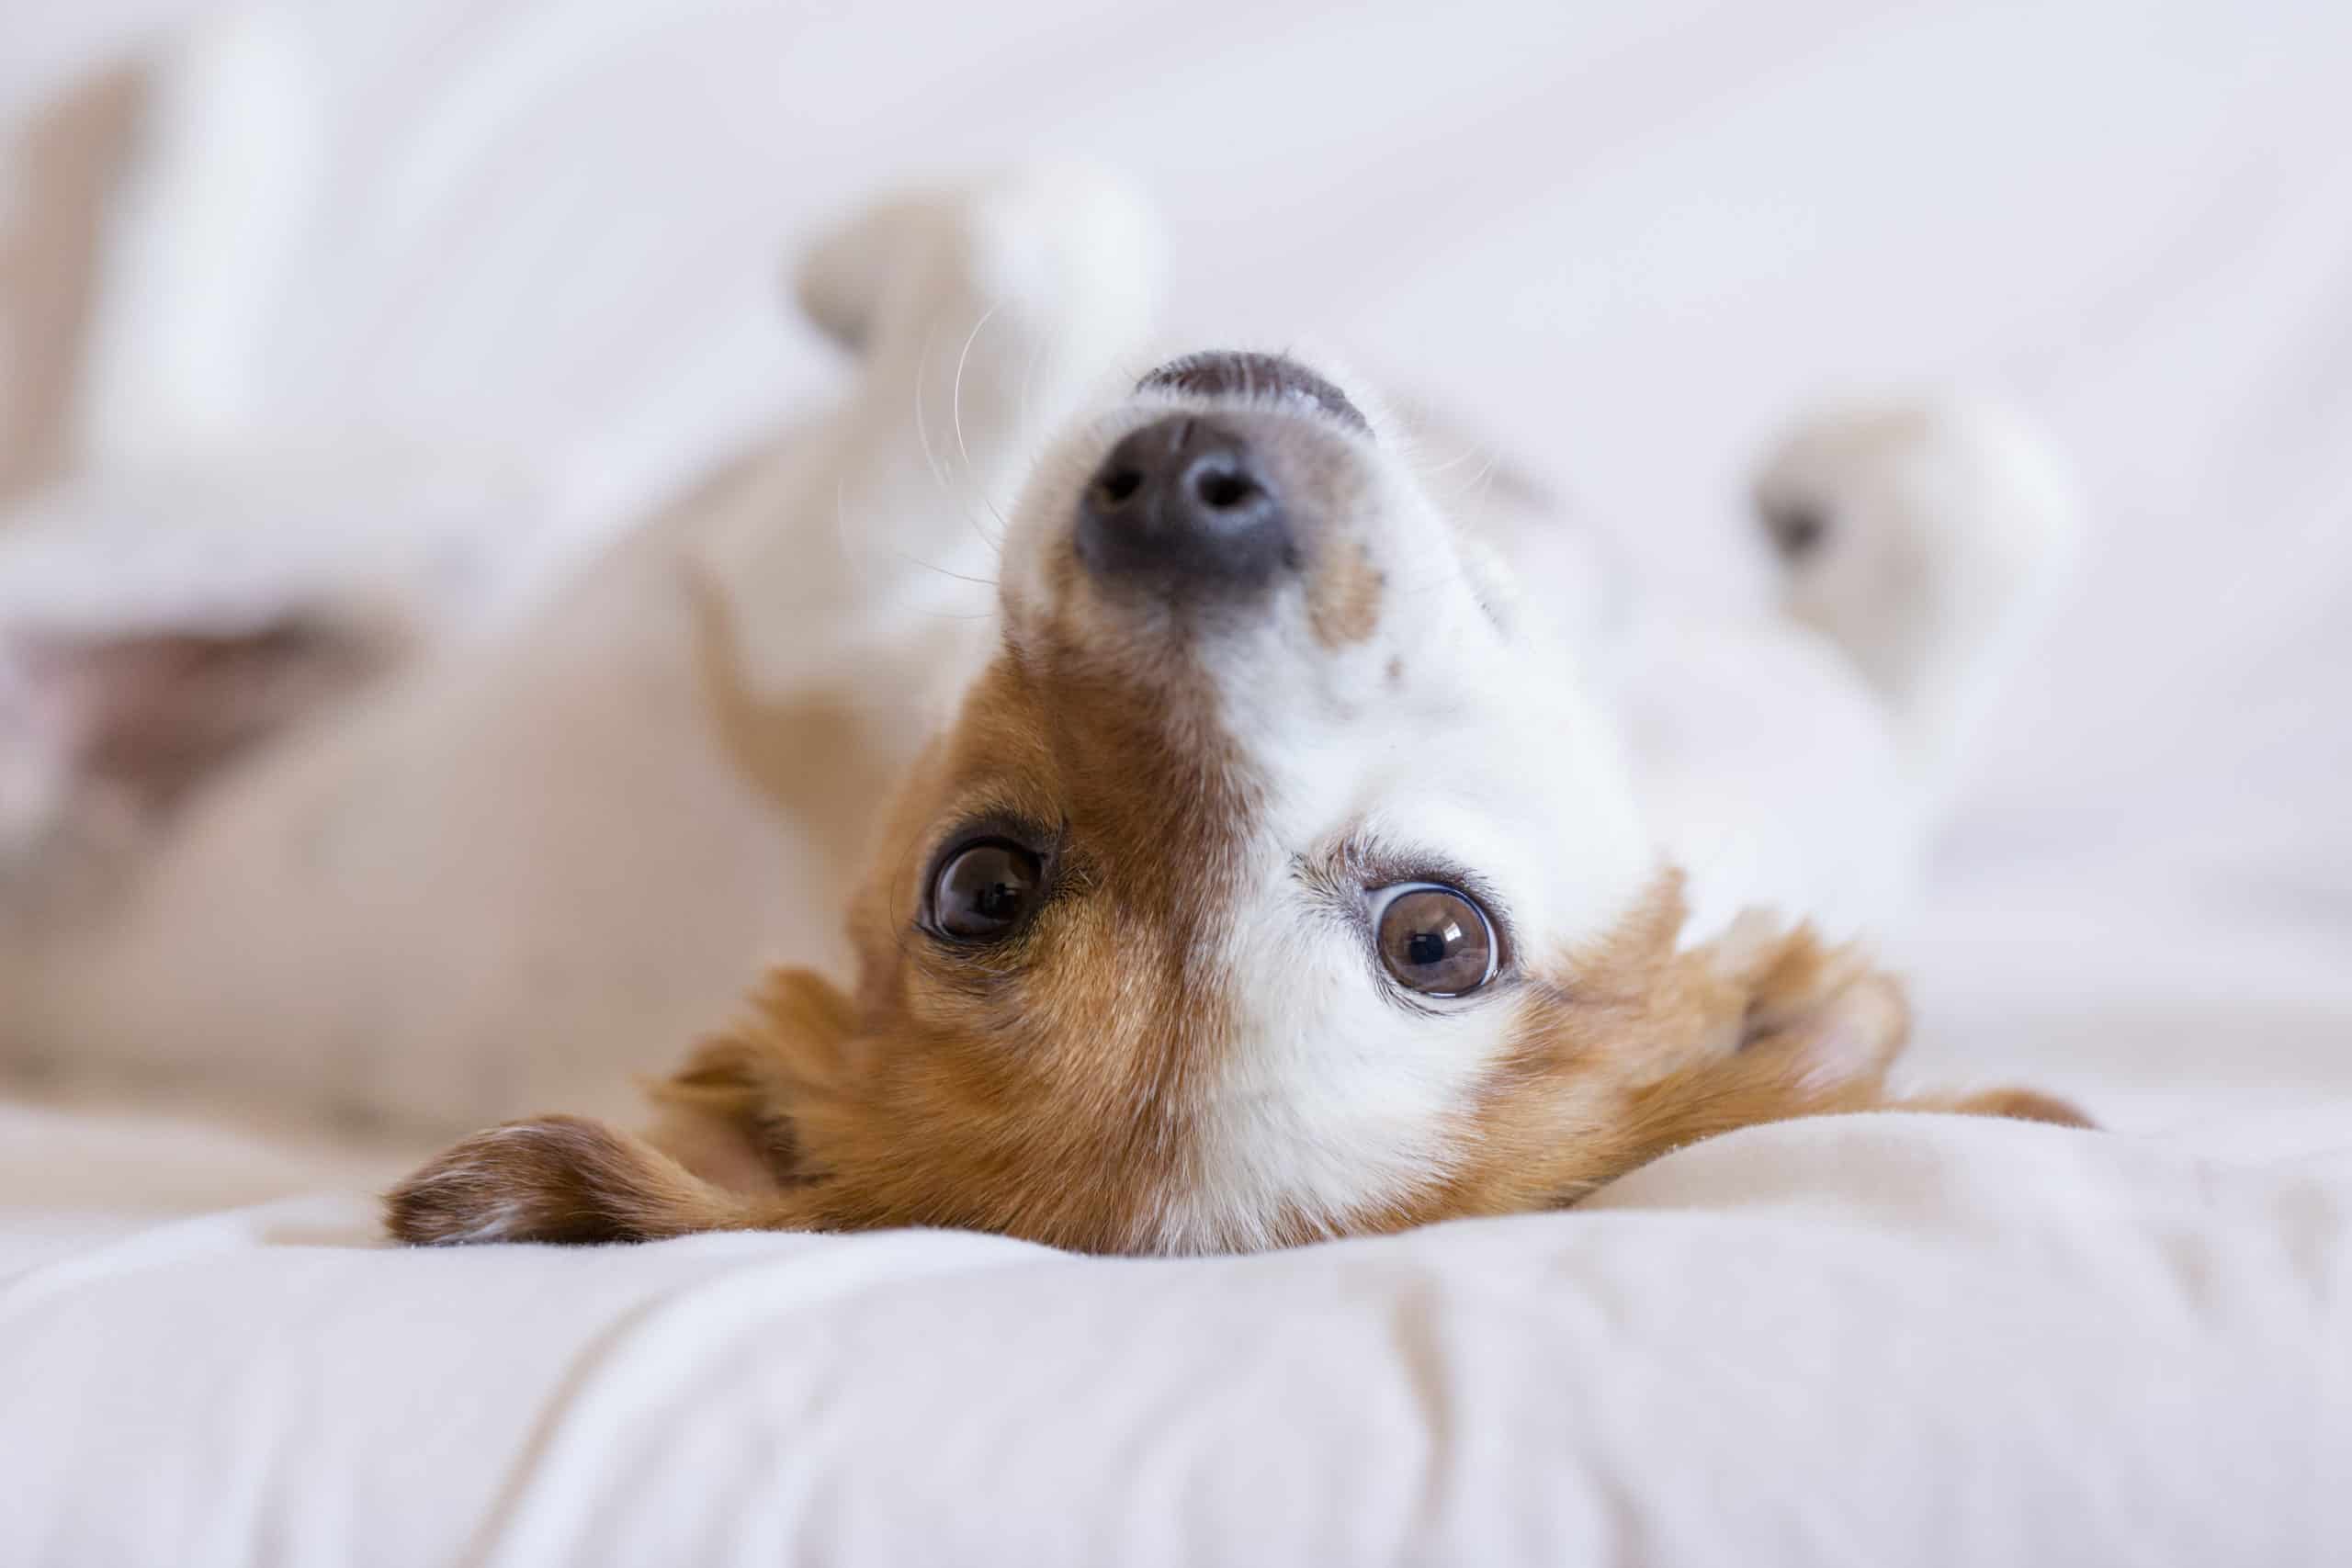 Why do dogs wake up so easily?